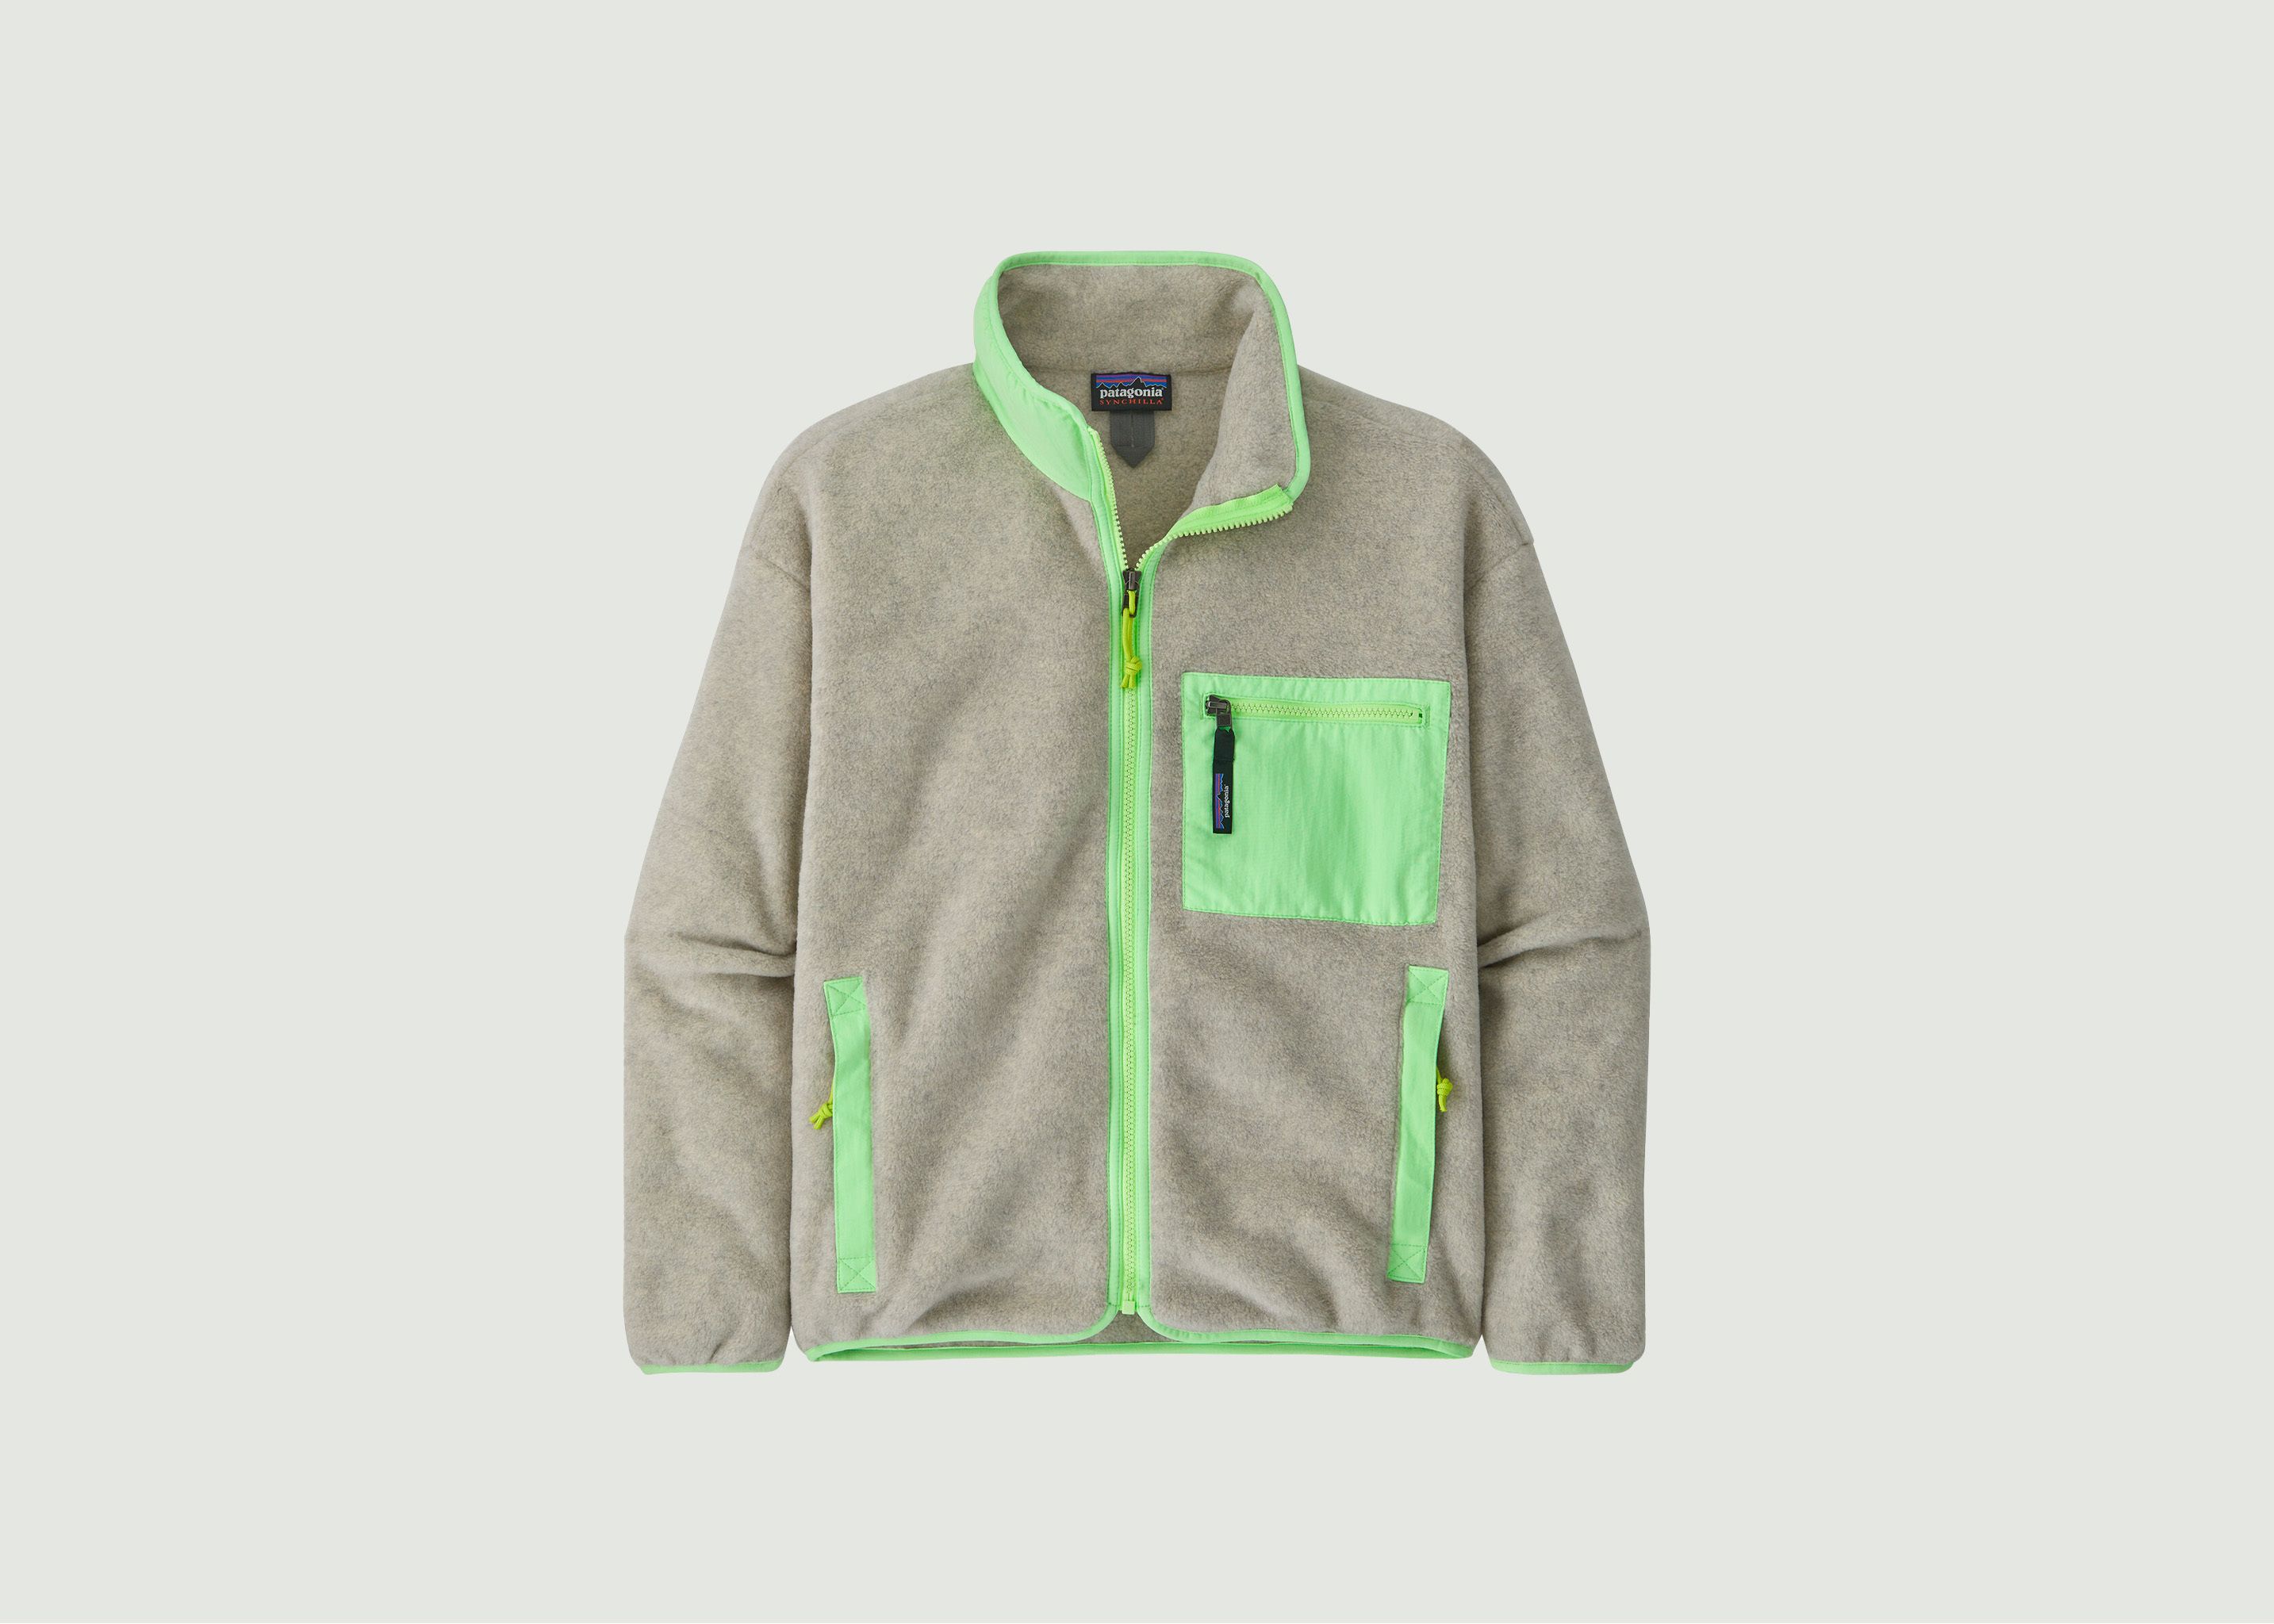 Zipped fleece with contrasting Synchilla details - Patagonia